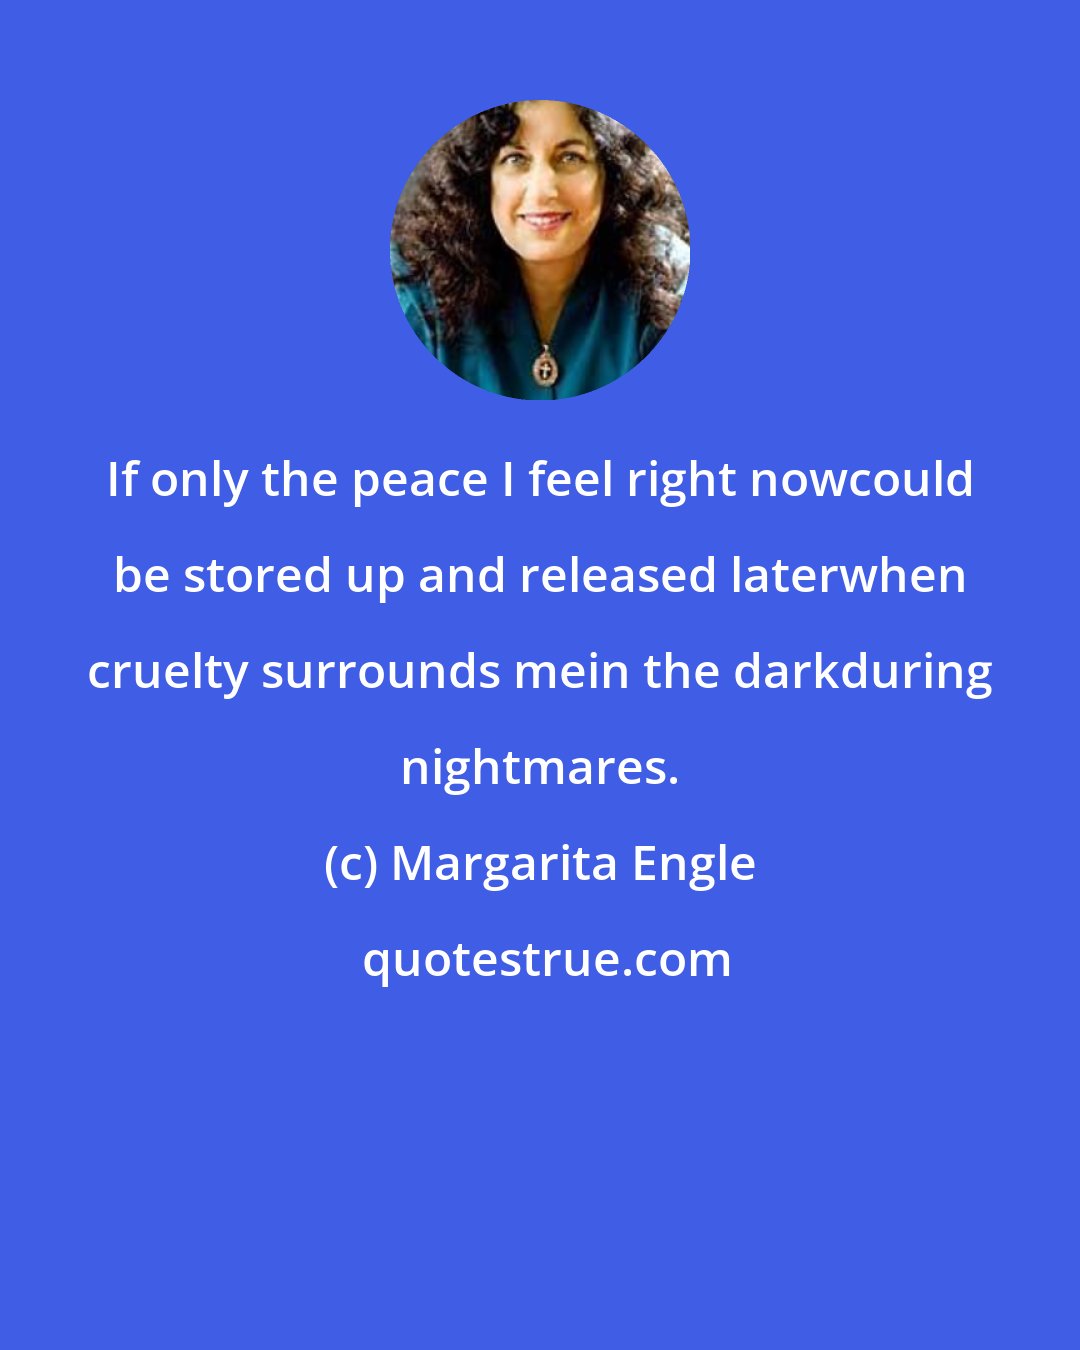 Margarita Engle: If only the peace I feel right nowcould be stored up and released laterwhen cruelty surrounds mein the darkduring nightmares.